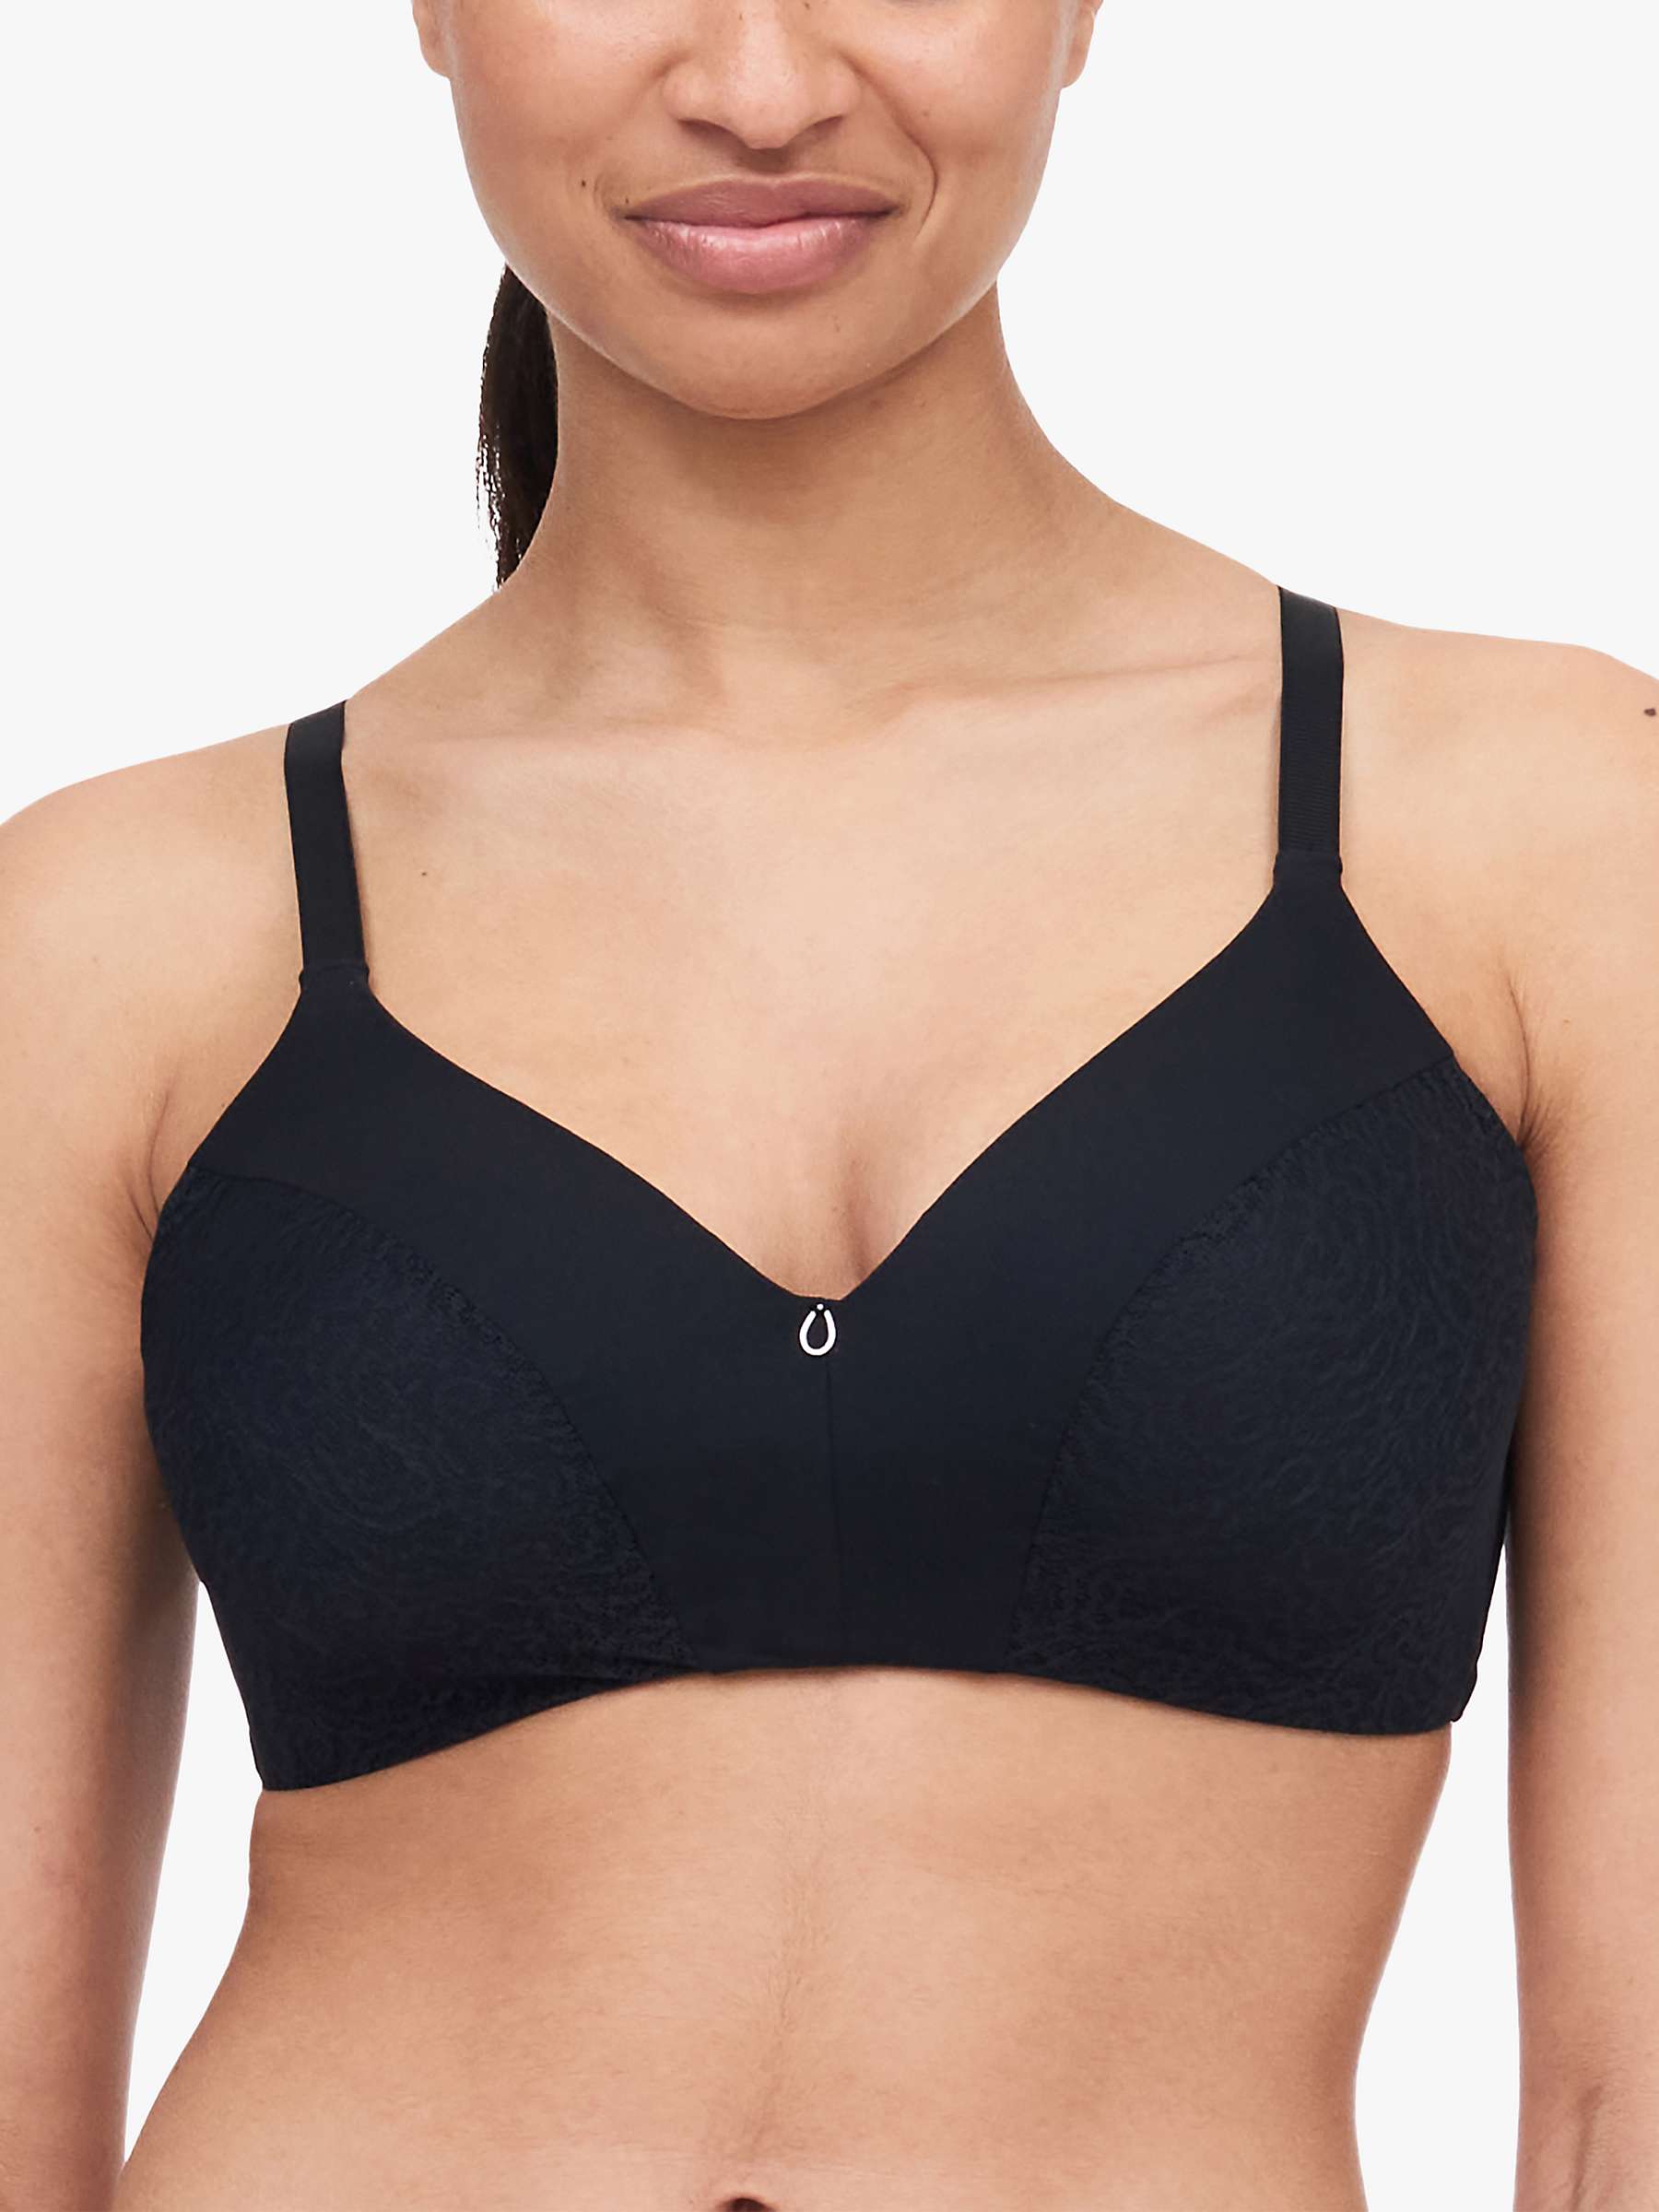 Buy Chantelle Cloudia Non Wired T-Shirt Bra Online at johnlewis.com